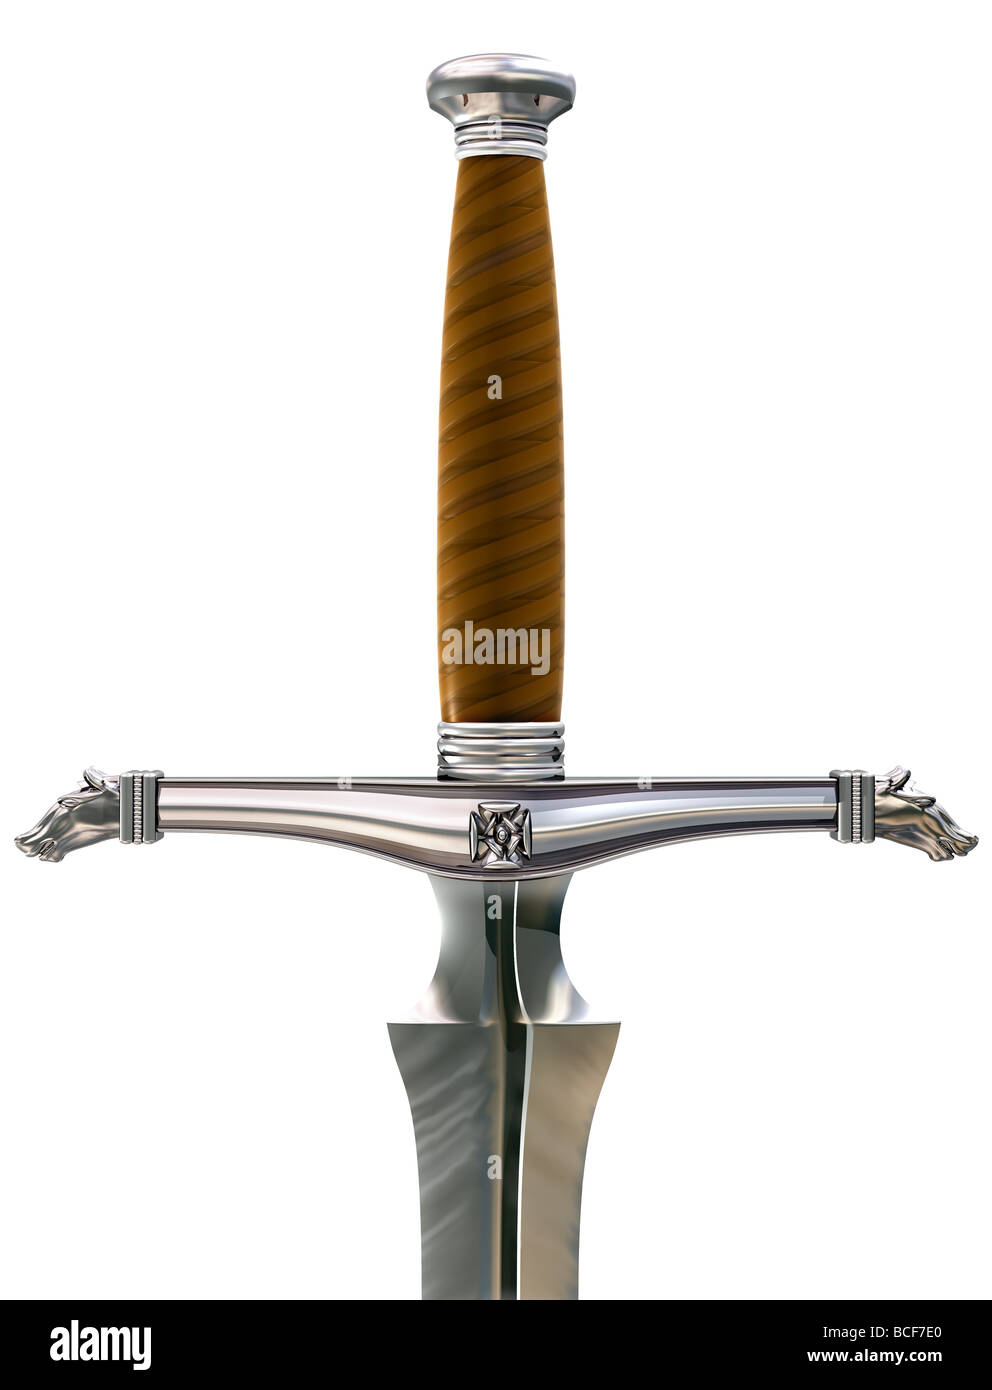 Isolated illustration of an ornate Norman battle sword hilt Stock Photo